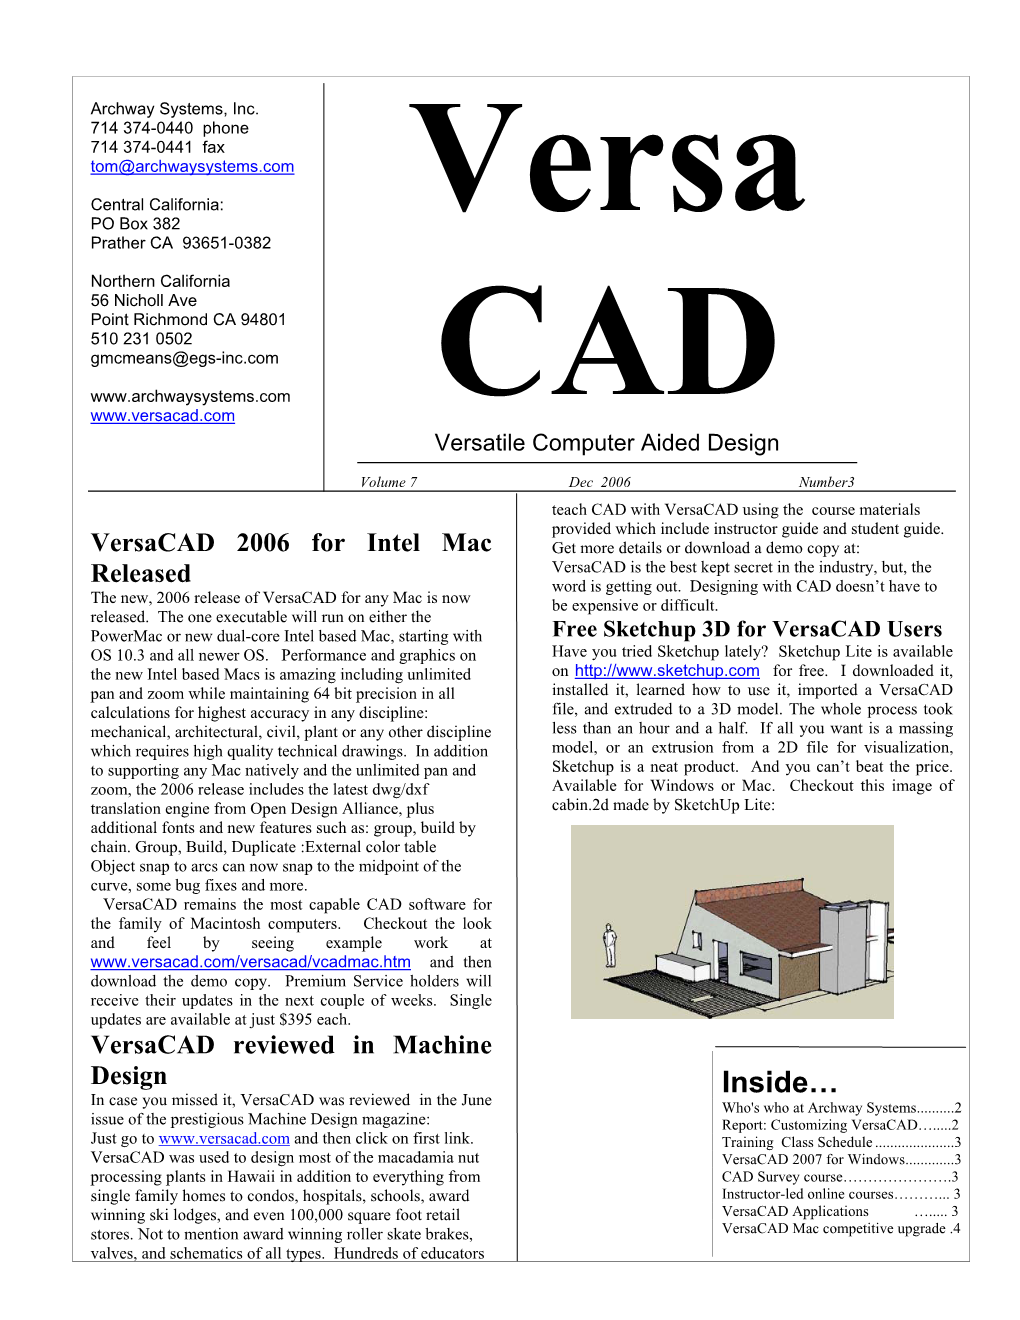 Inside… in Case You Missed It, Versacad Was Reviewed in the June Who's Who at Archway Systems